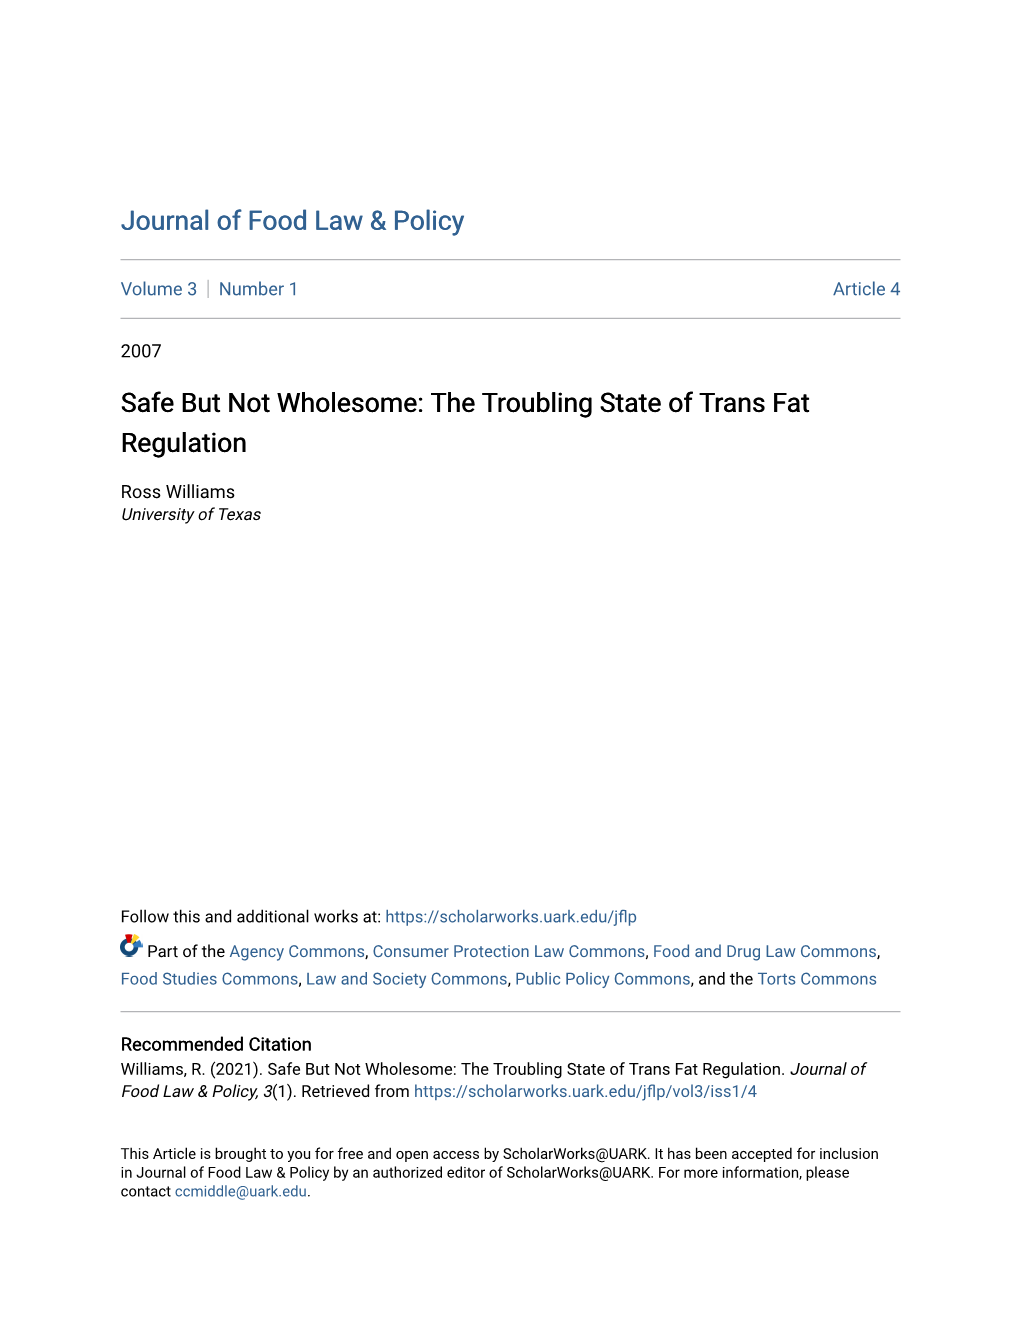 The Troubling State of Trans Fat Regulation